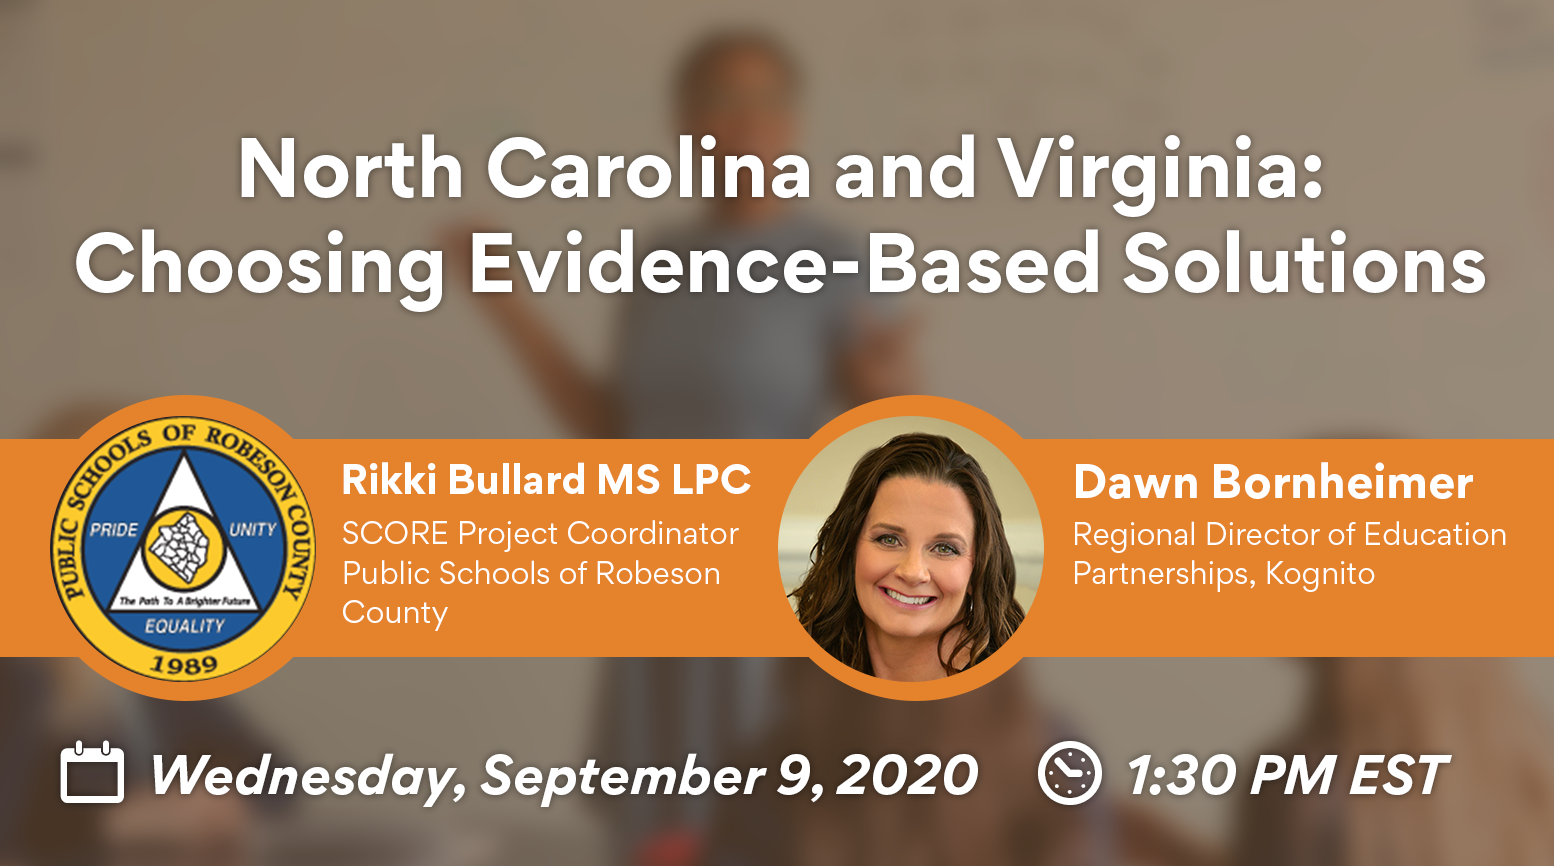 North Carolina and Virginia: Choosing Evidence-Based Solutions that Support Student Mental Health